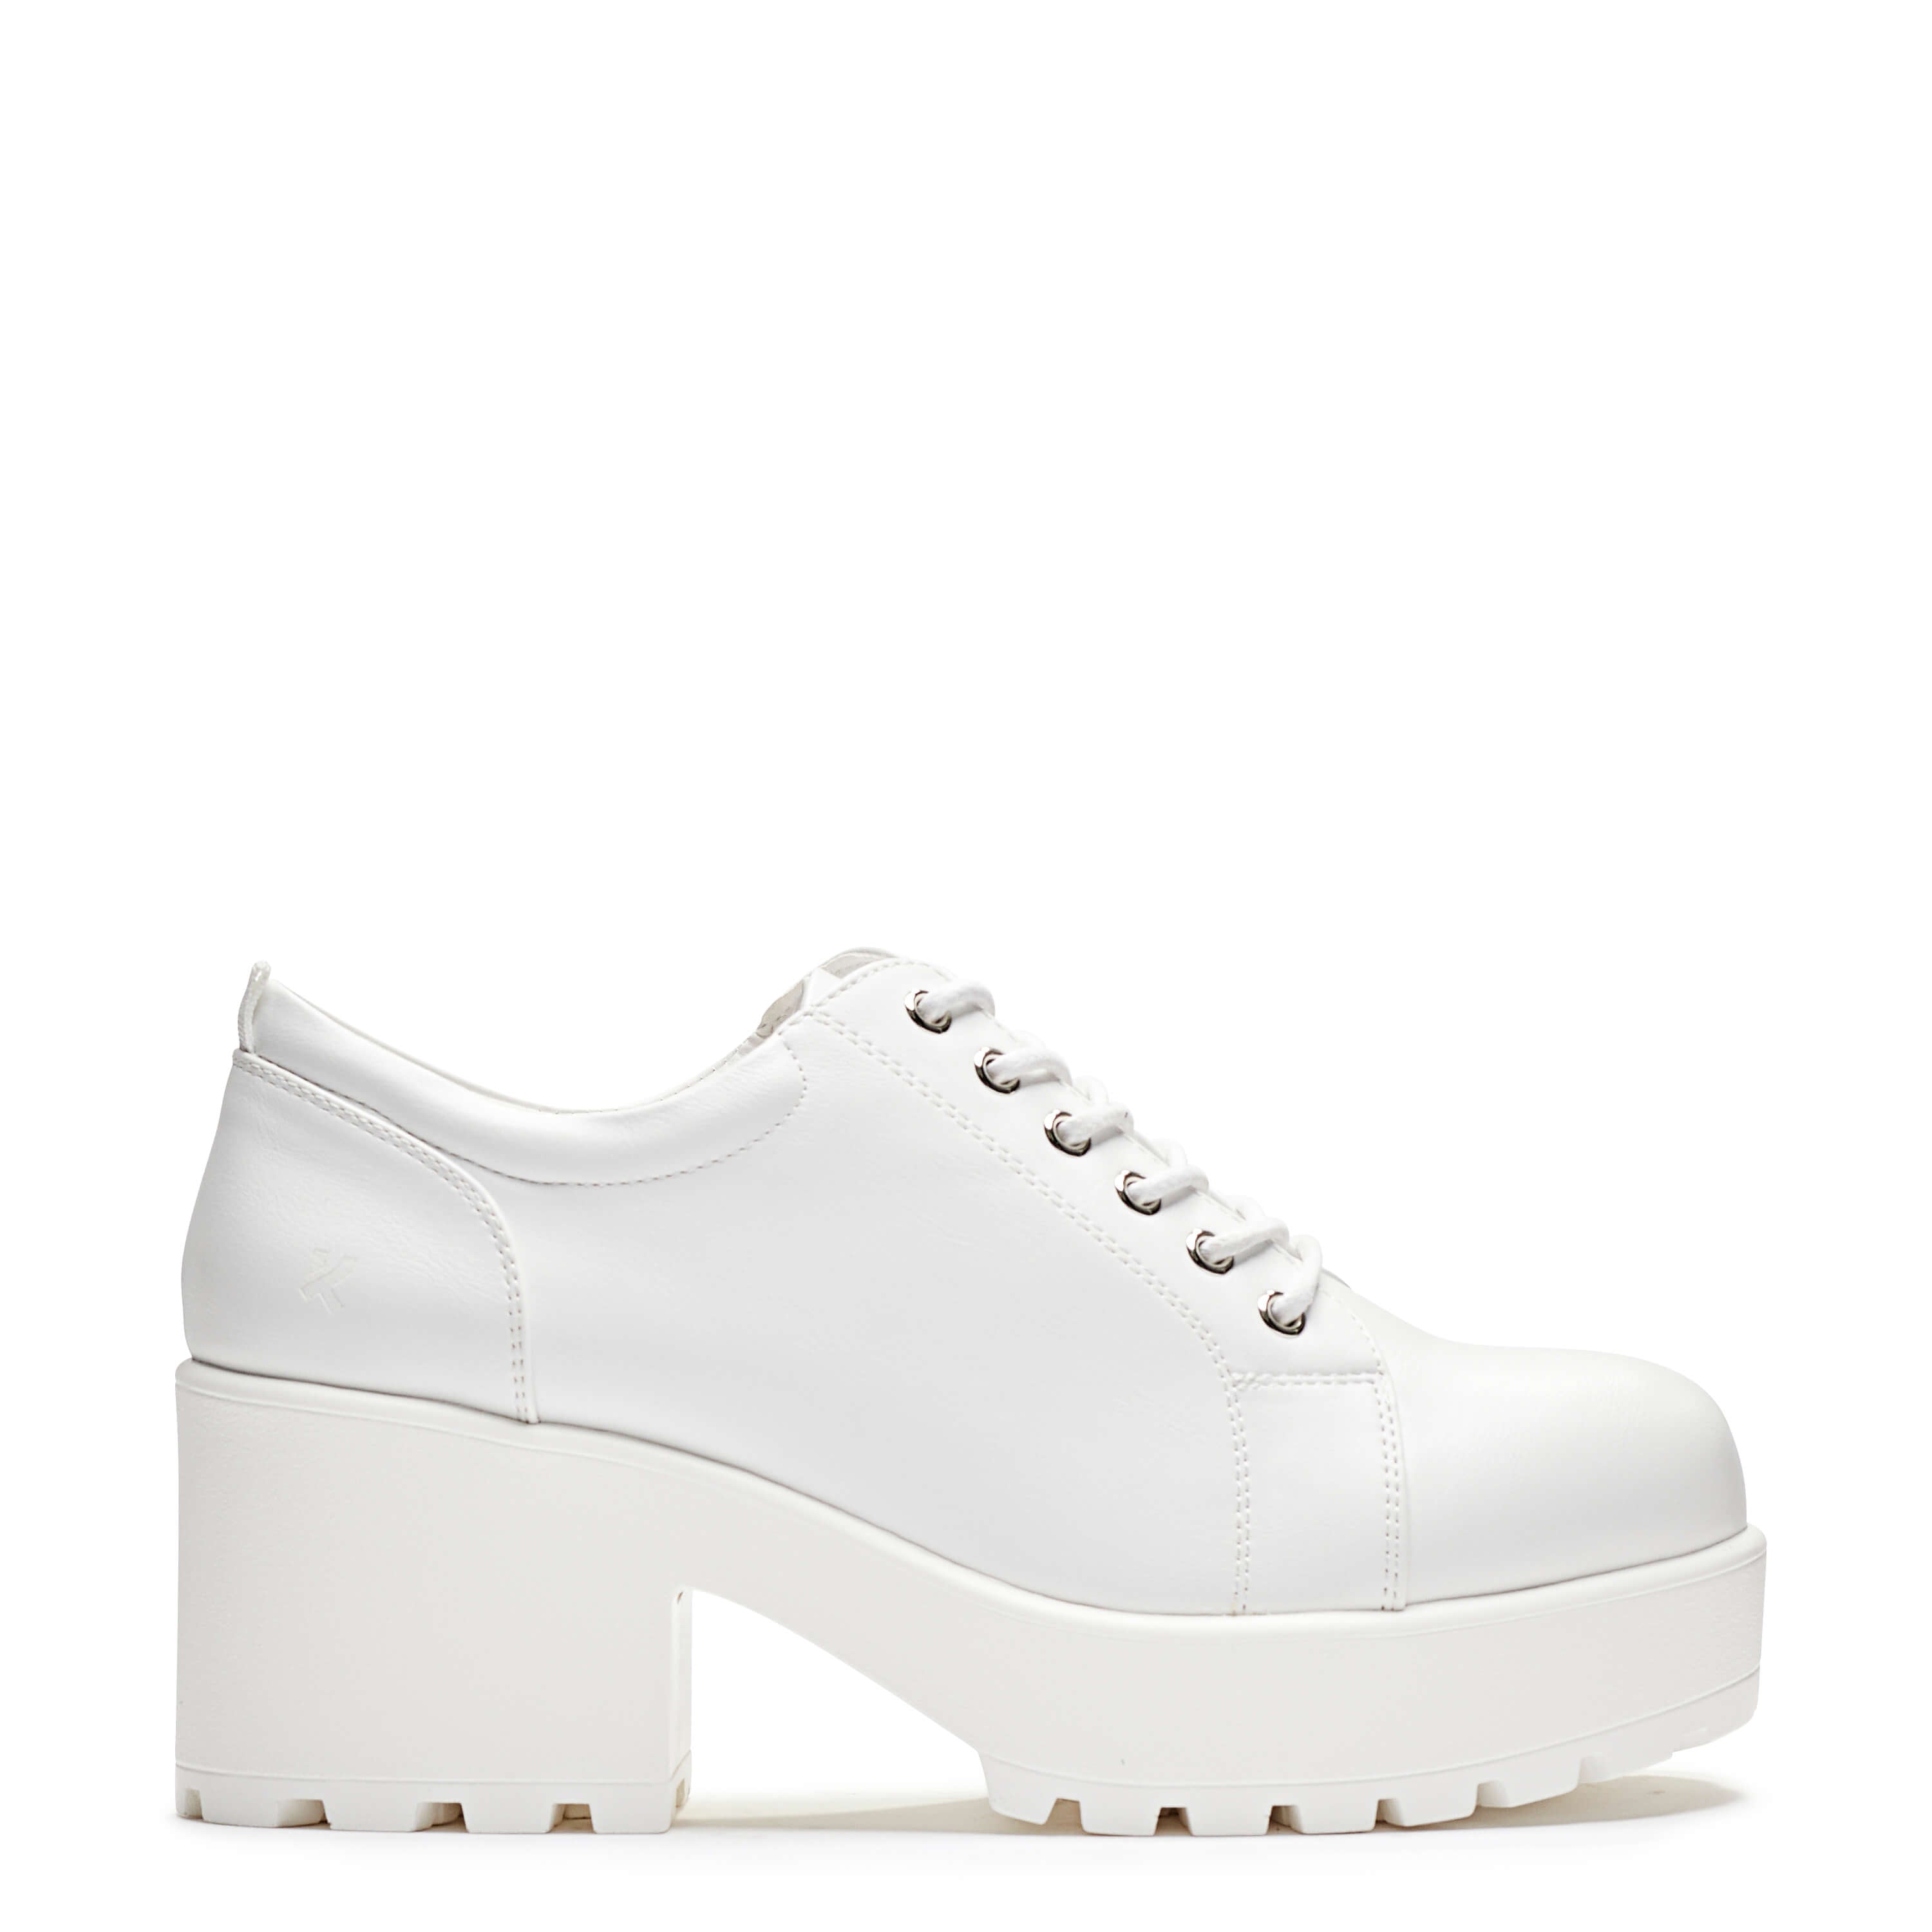 Rei Reloaded White Chunky Shoes – KOI footwear